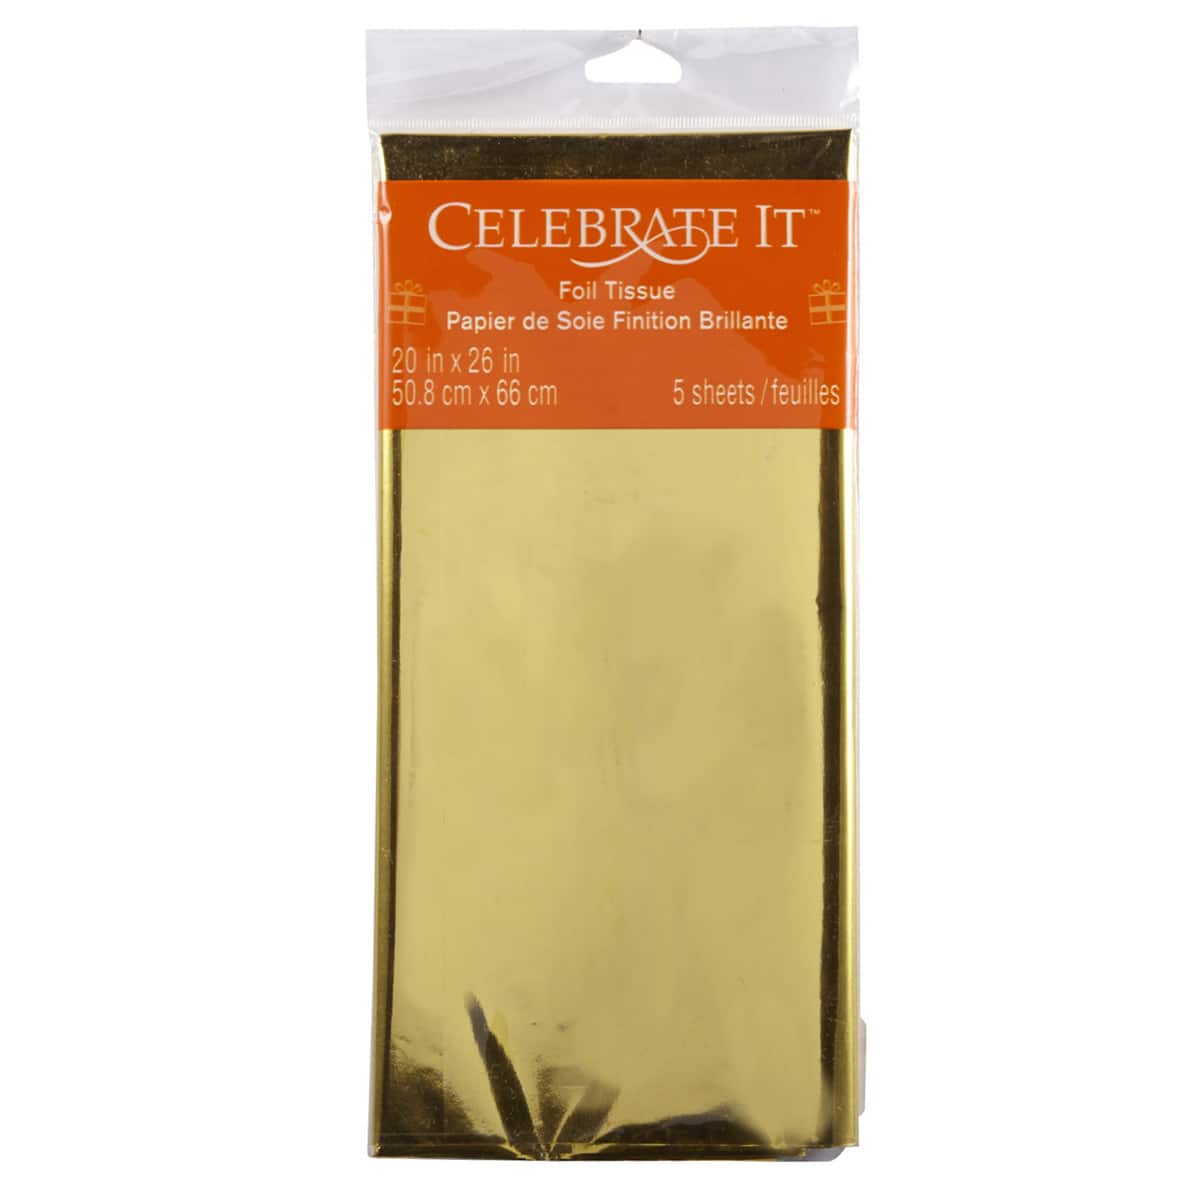 Gold, White & Silver Tissue Paper, 24ct. by Celebrate It™, 20 x 20